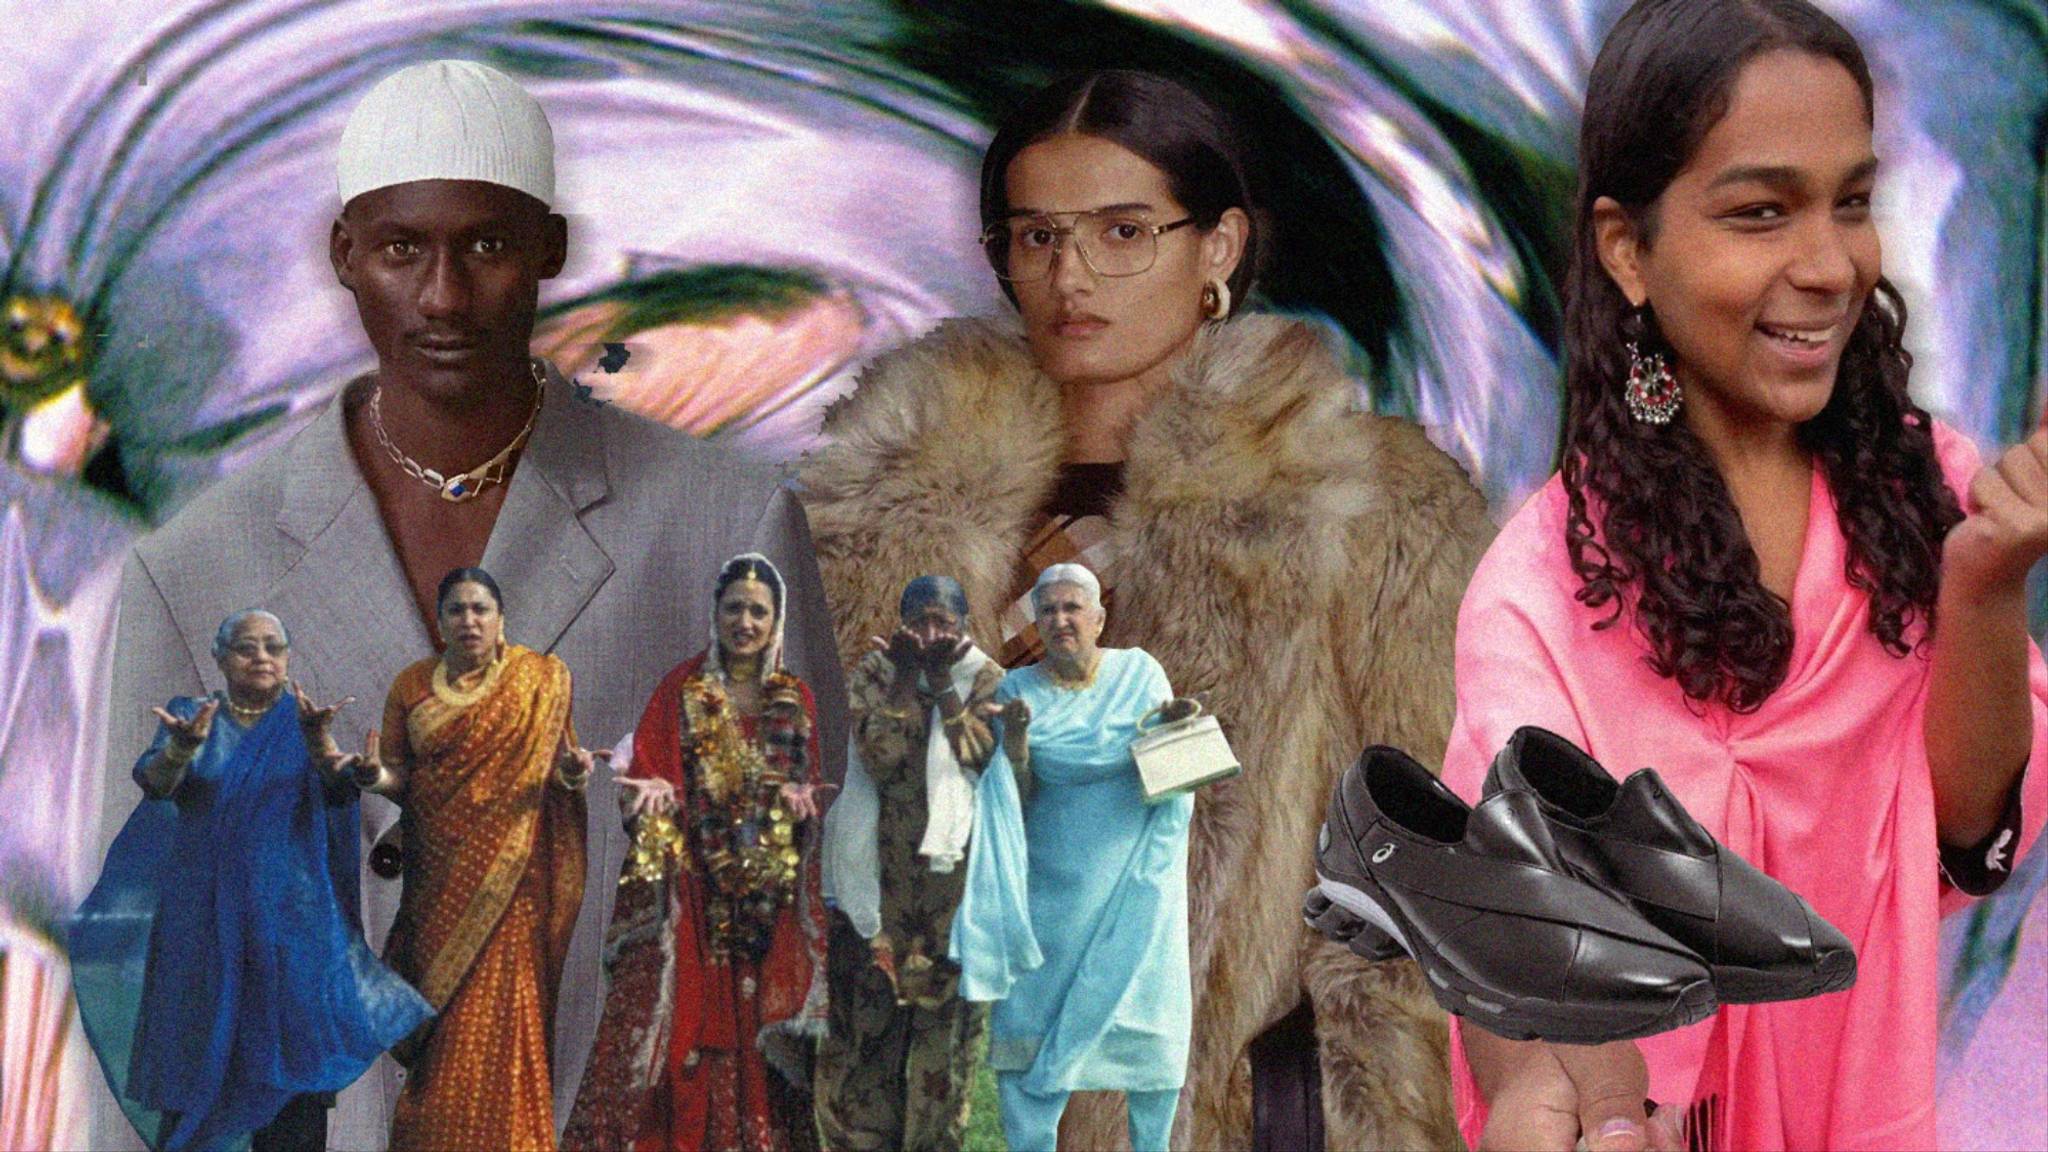 People are taking fashion inspo from cultural heritage